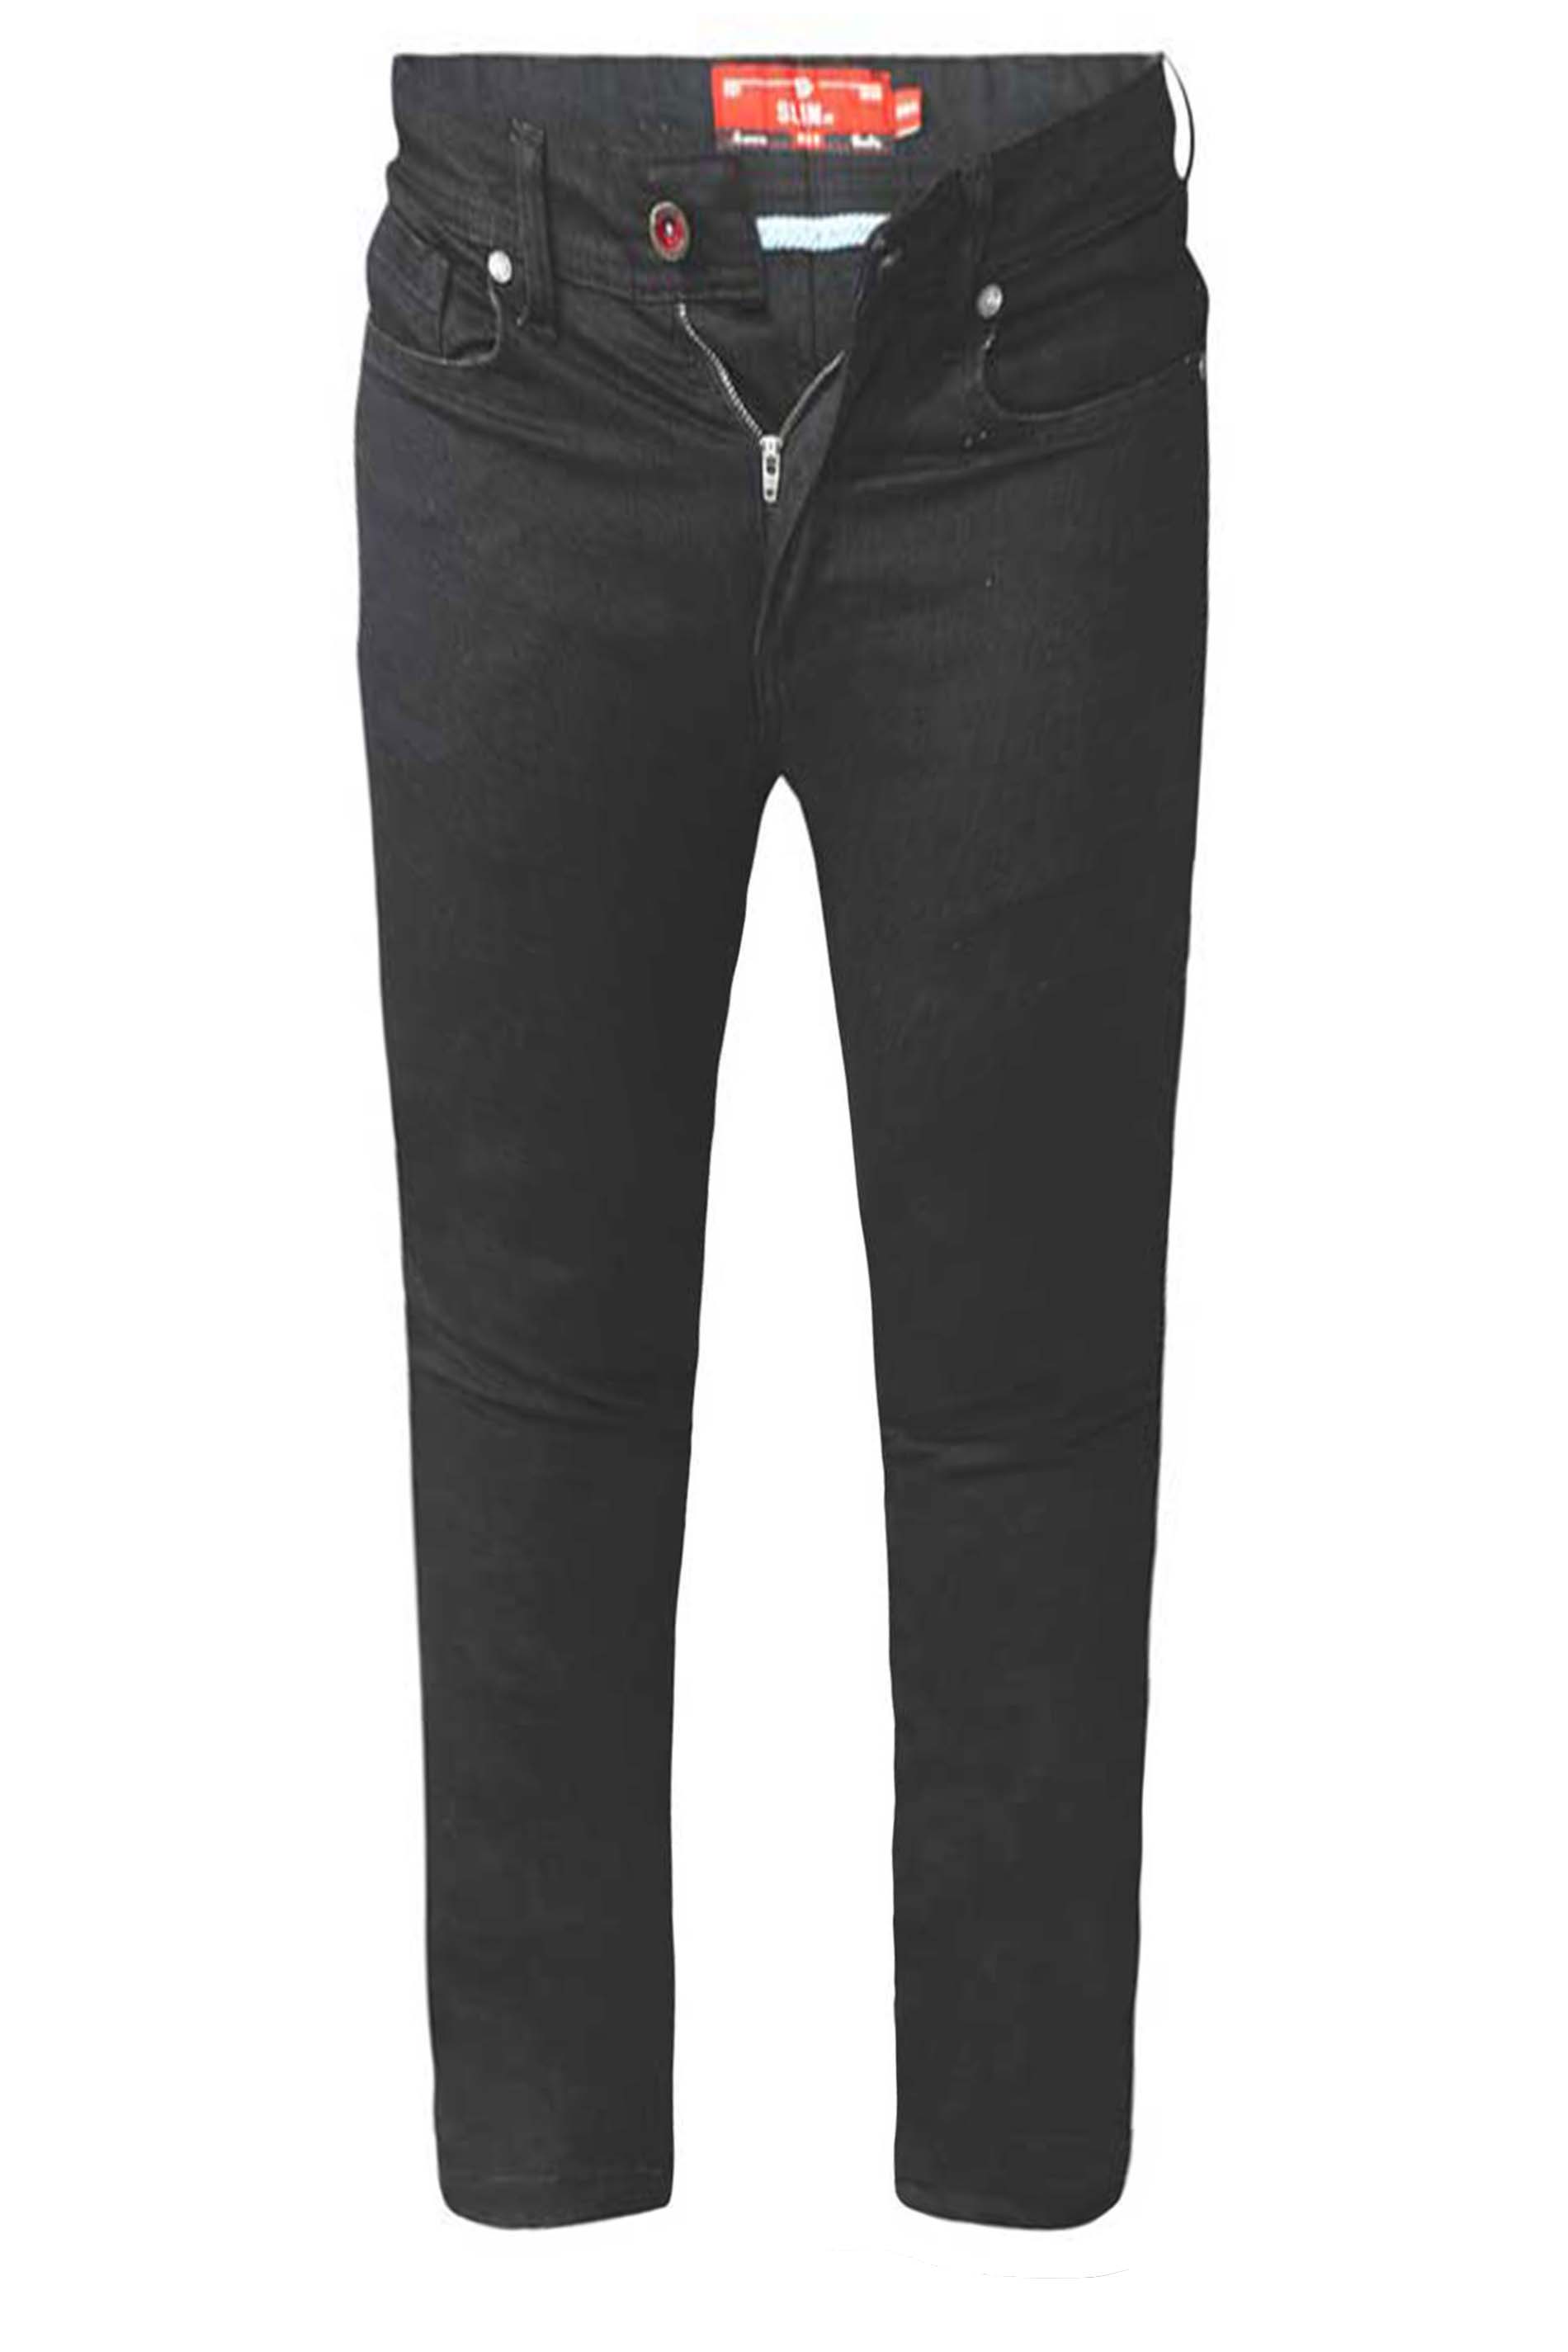 D555 Black Tapered Stretch Jeans | BadRhino 3